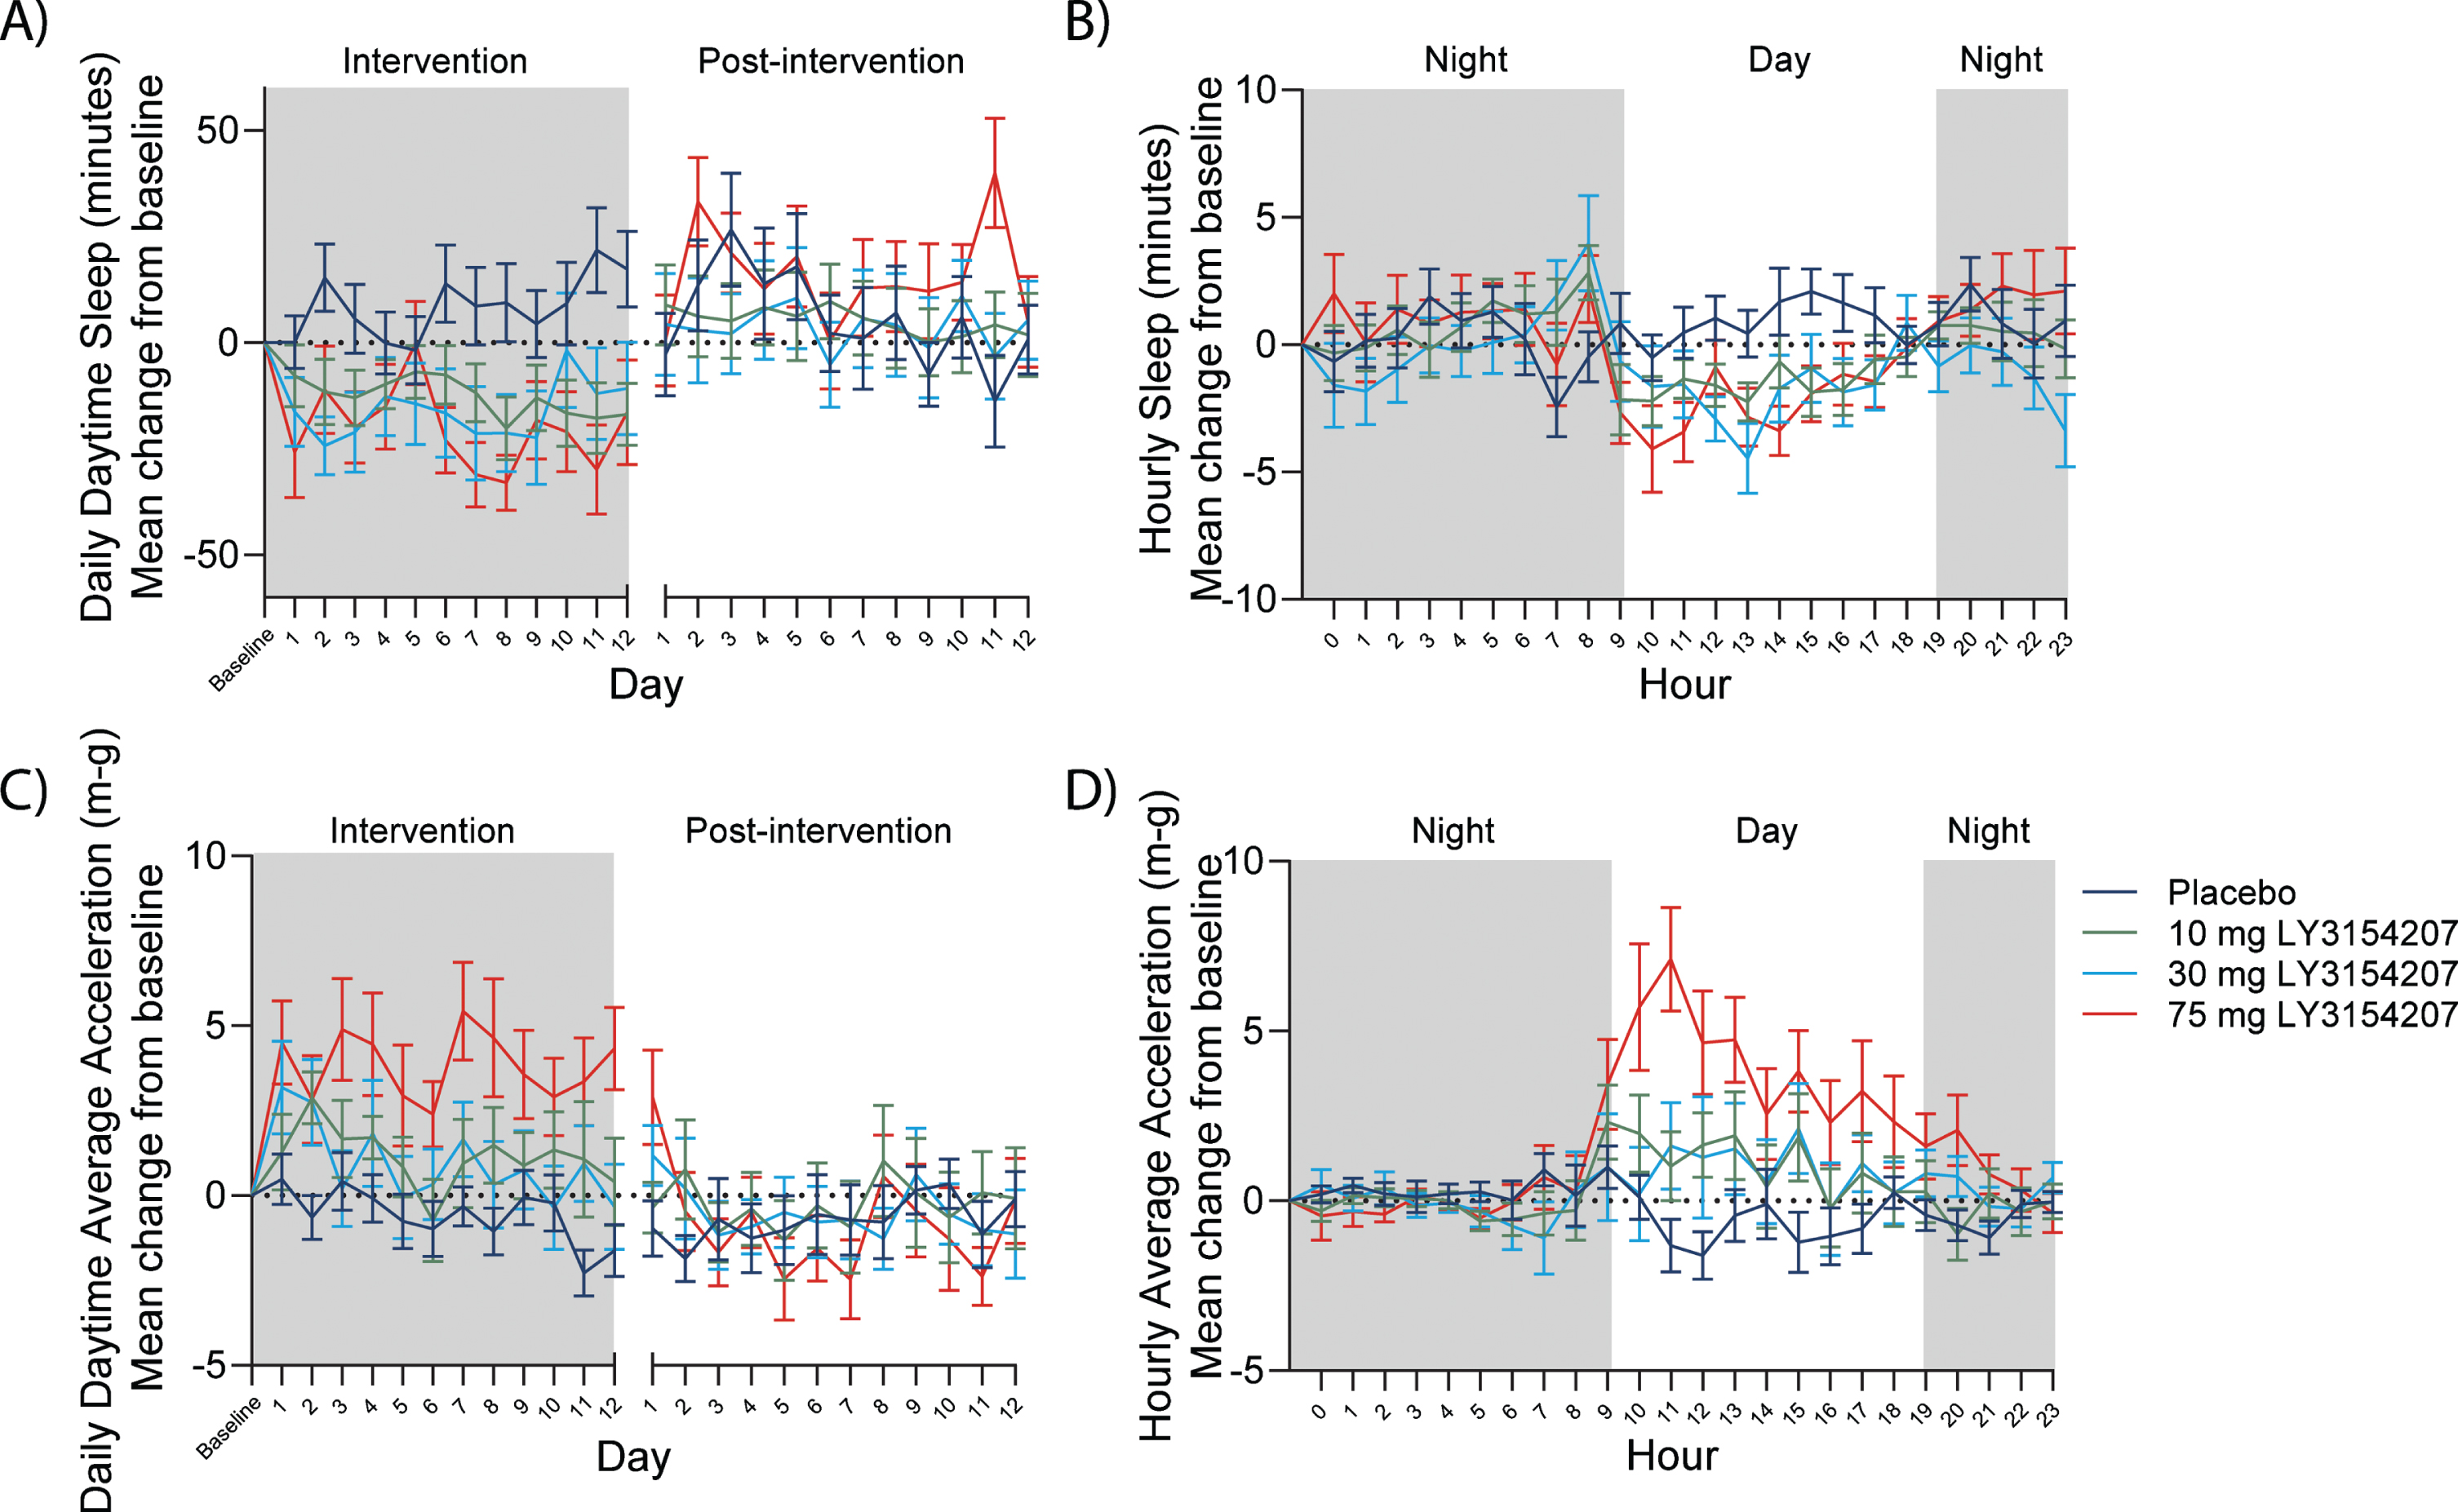 Digital biomarkers such as actigraphy allow for continuous data capture. A) Daily sleep. Reduction in total daytime sleep every day at all doses relative to placebo at steady state, with return to baseline post-intervention. B) Hourly sleep. Reduction in daytime sleep/inactivity from 9am to 3pm at all doses relative to placebo. C) Daily activity. Increase in average acceleration (m-g) every day at all doses relative to placebo at steady state, with return to baseline post-intervention. D) Hourly activity. Increase in average acceleration (m-g) from 9am to 7pm at all doses relative to placebo. Night in this study was defined as 7pm to 9am. X-axis break in A) and C) indicates the several weeks between intervention and post-intervention as per study schematic showing the PRESENCE trial period and the use of digital devices in Fig. 1.